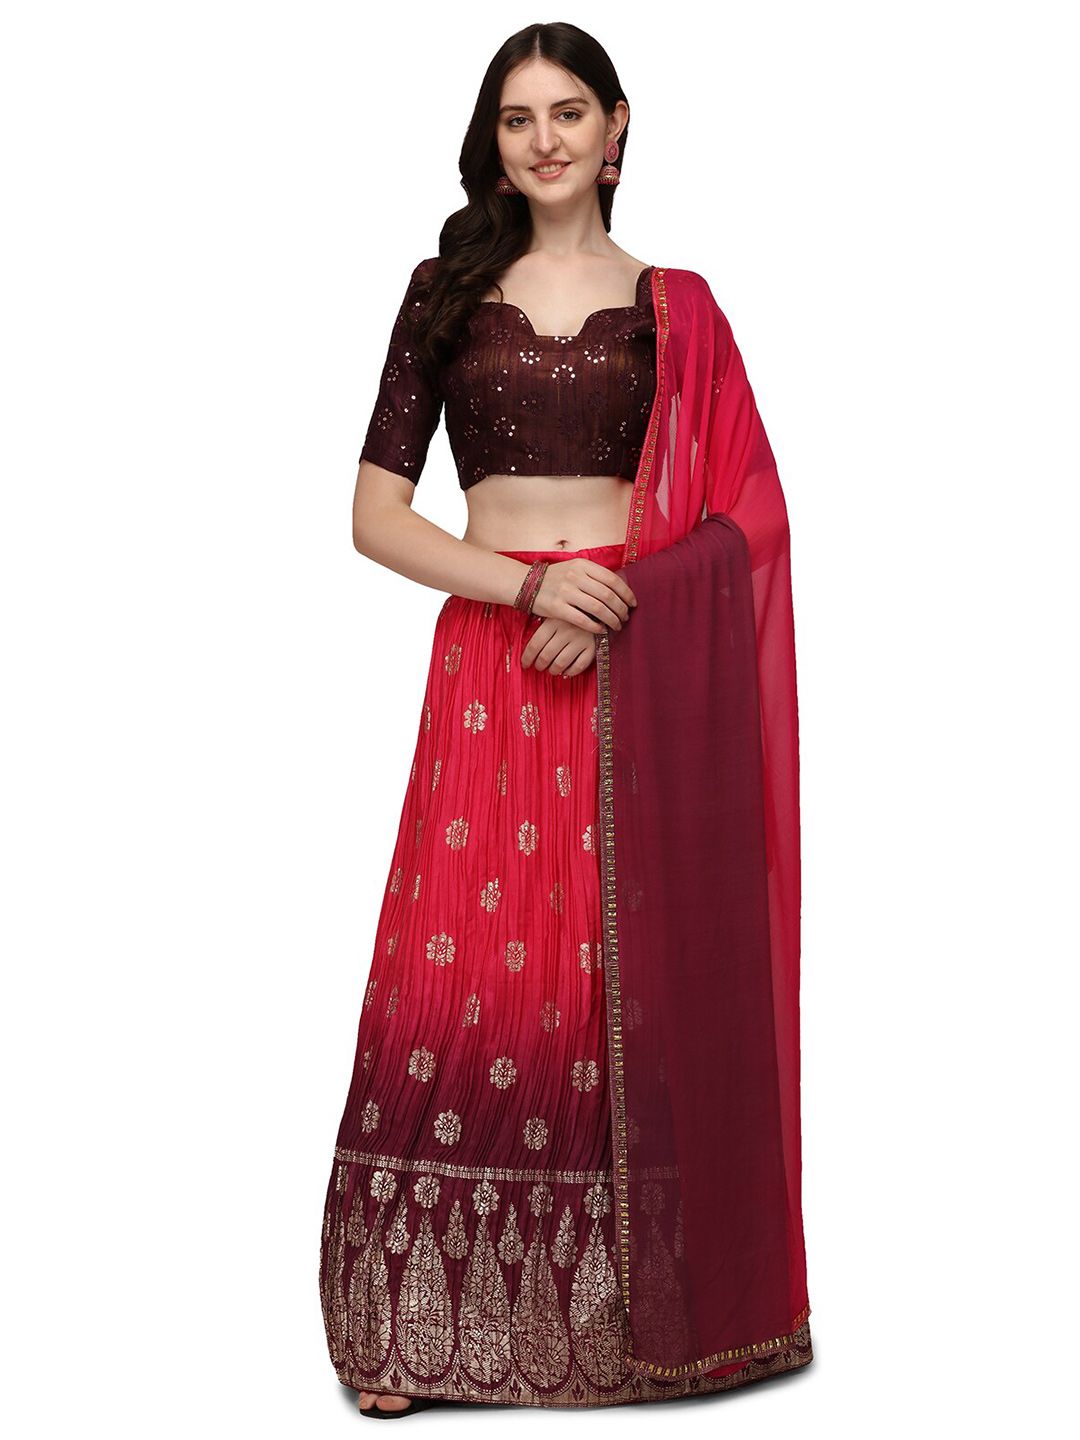 Pratham Blue Pink & Maroon Embroidered Semi-Stitched Lehenga & Unstitched Blouse With Dupatta Price in India